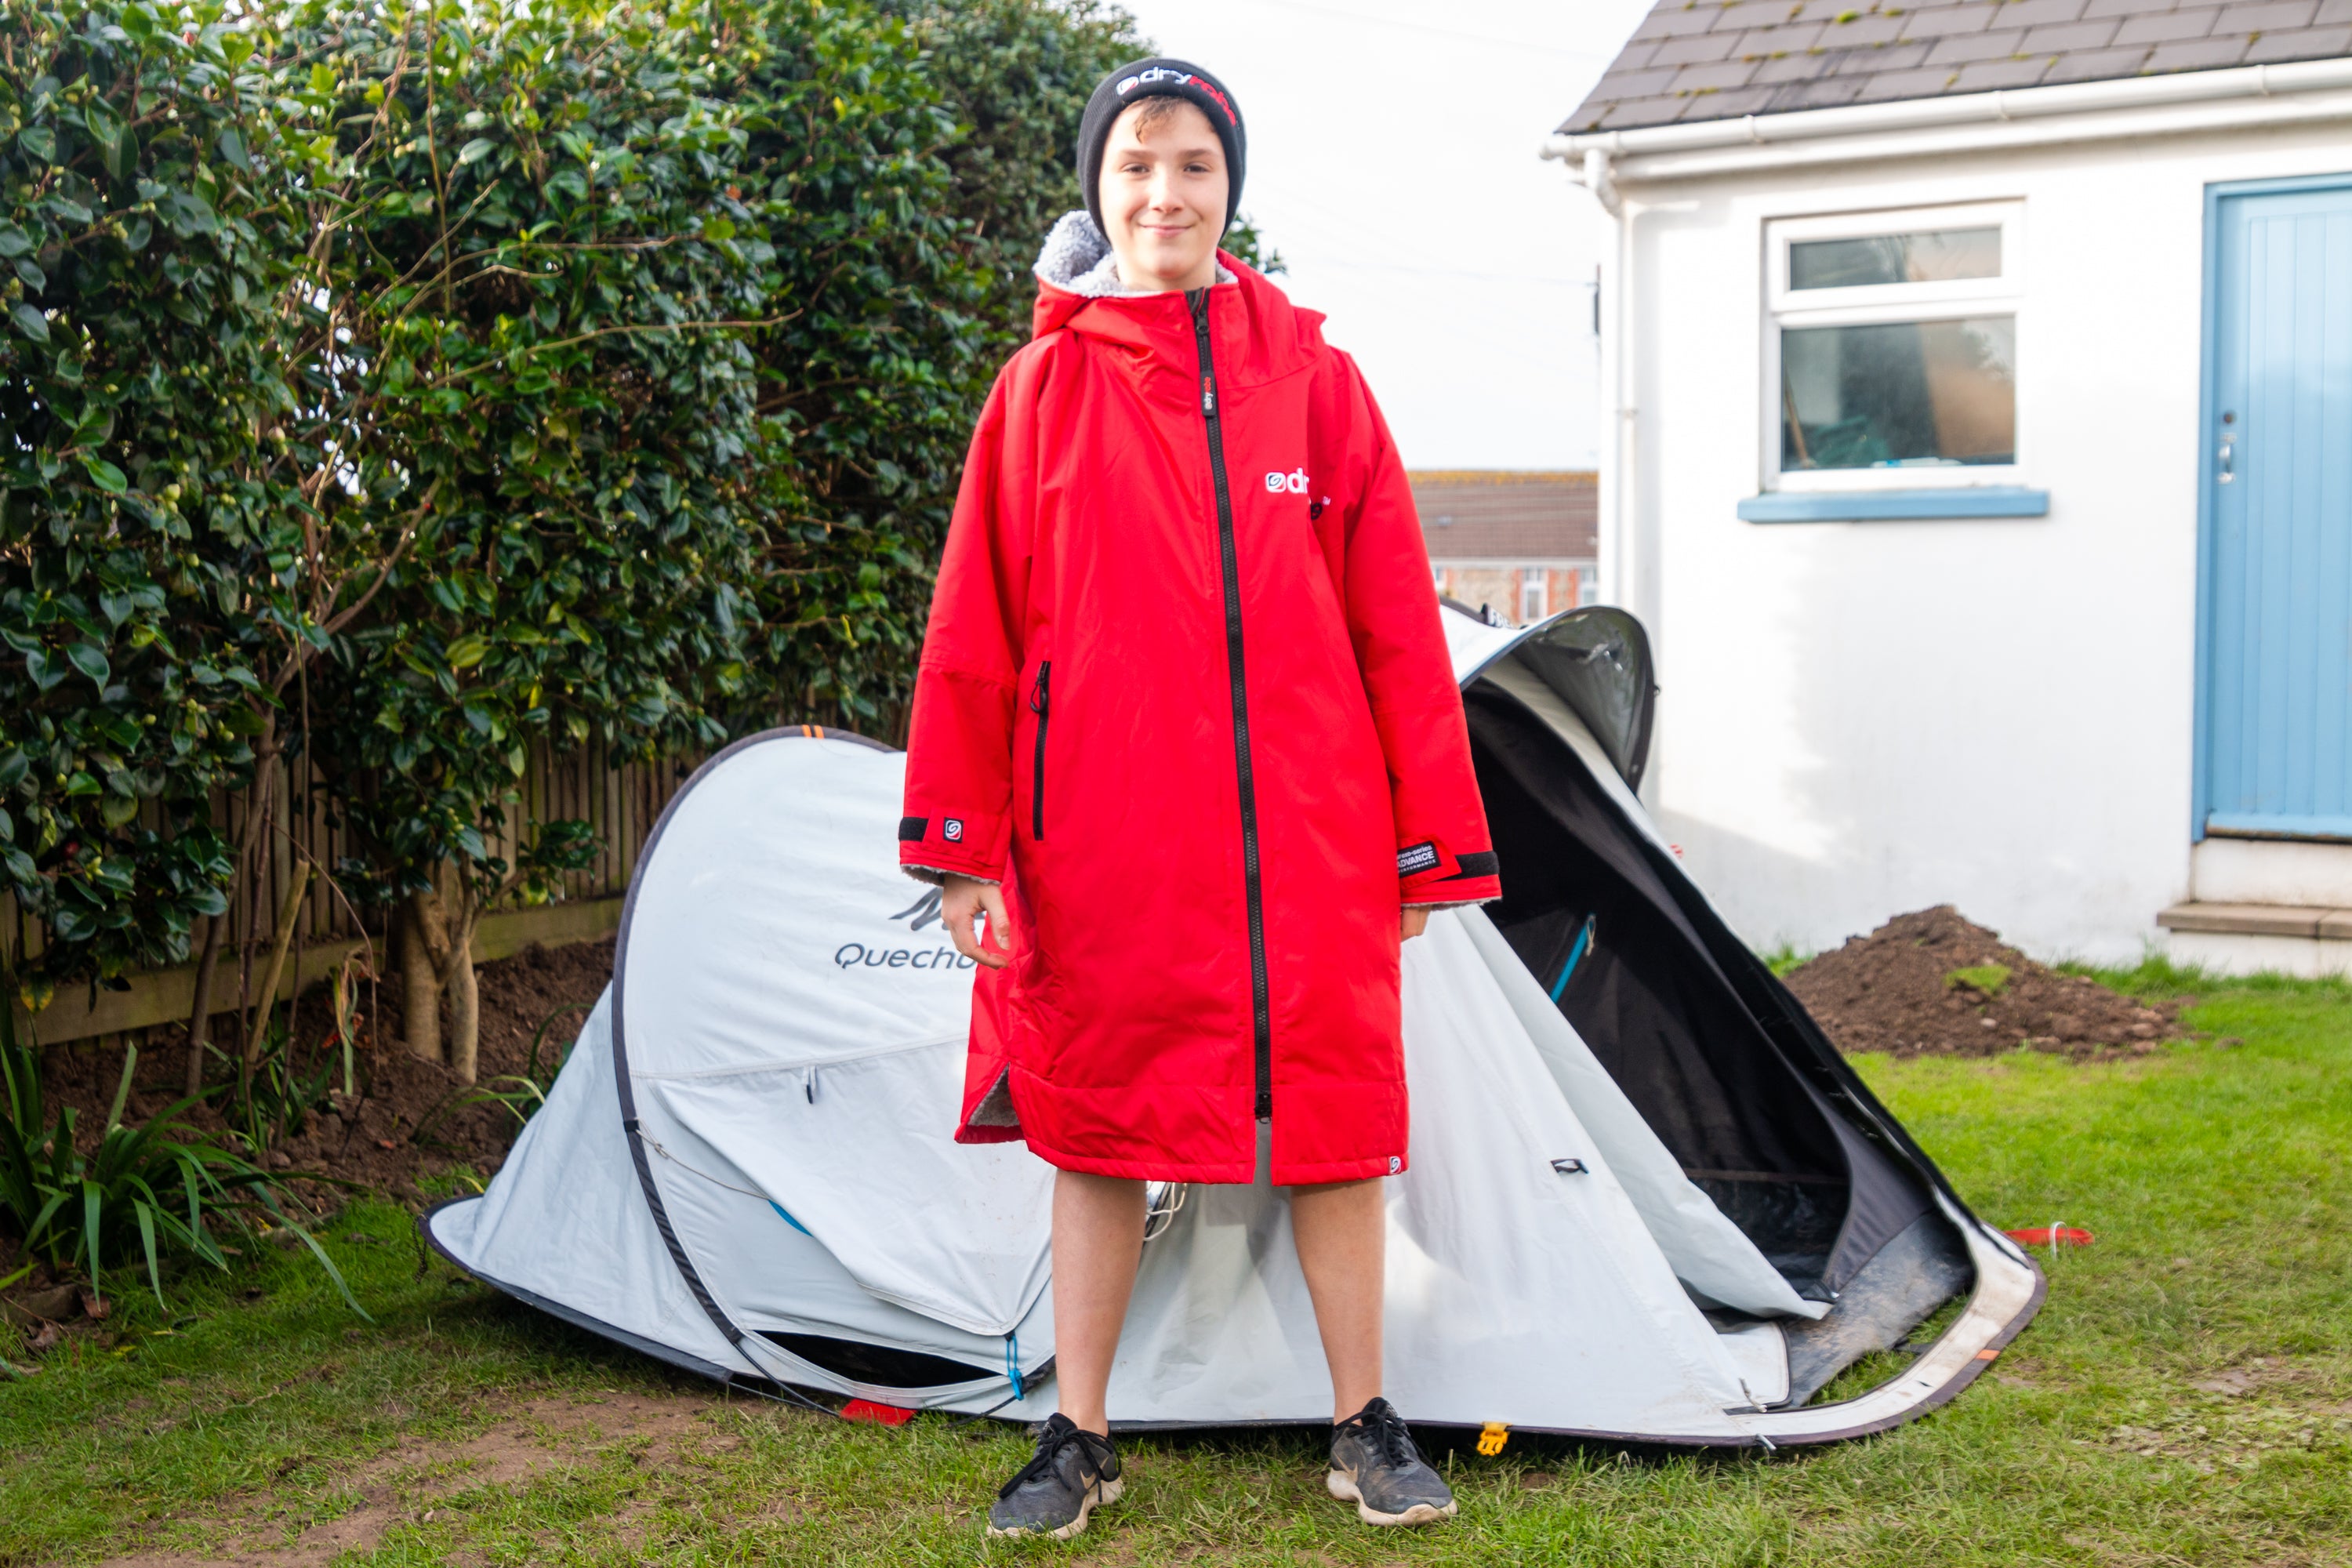 Max Woosey standing by his tent wearing a red dryrobe